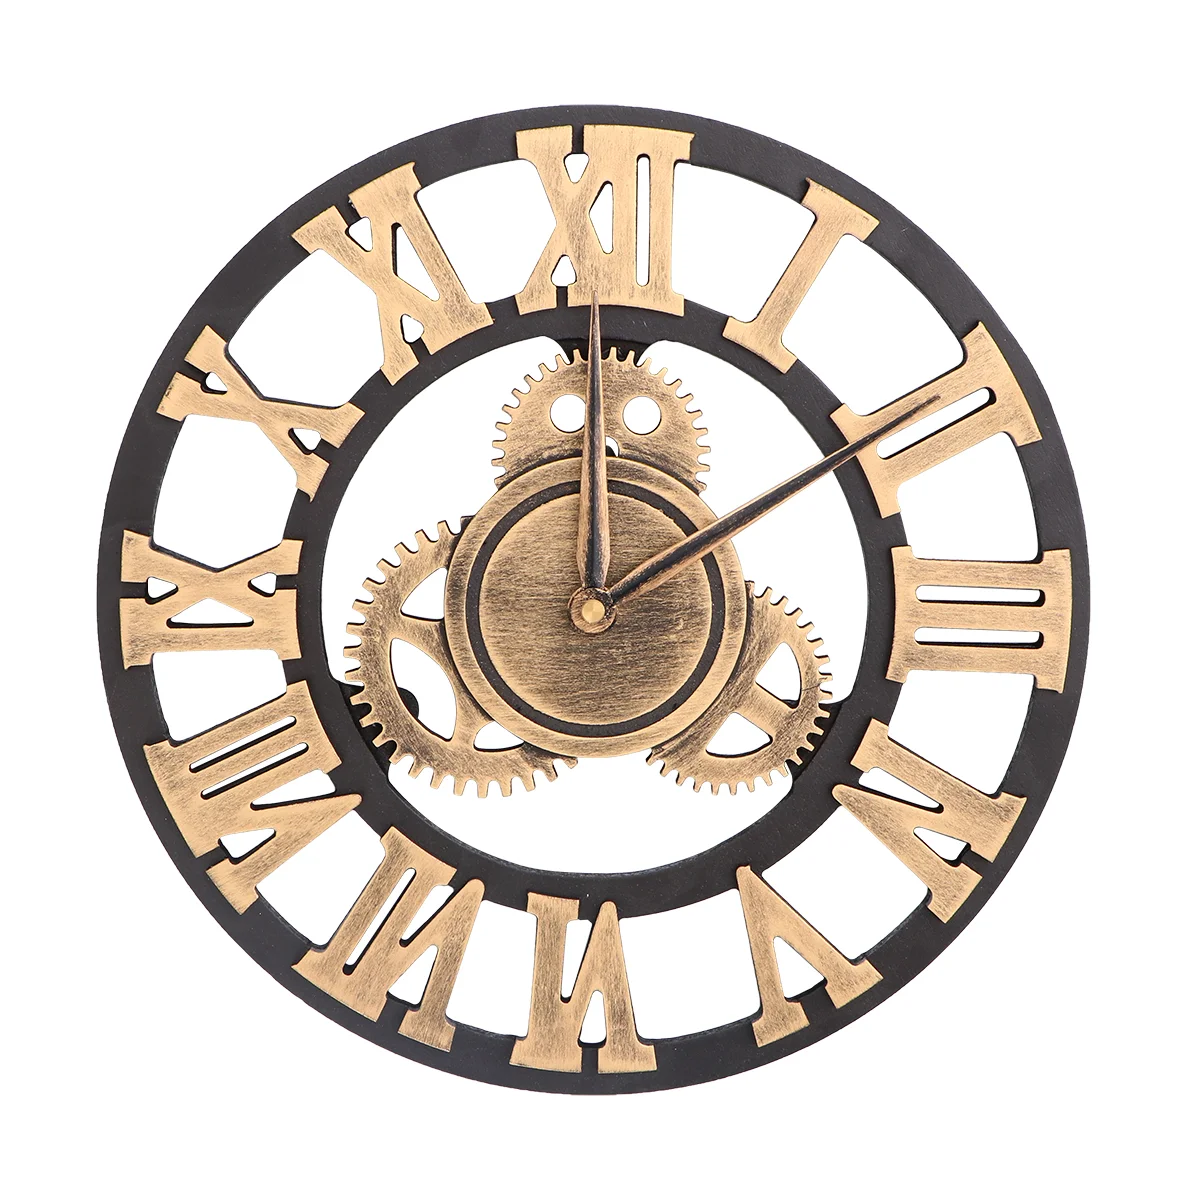 

Industrial Moving Gear Vintage Wall Clock Rustic Wooden Wall Clock Roman Numerals Round Non- Ticking Silent Wall Clock 30cm 1Pc